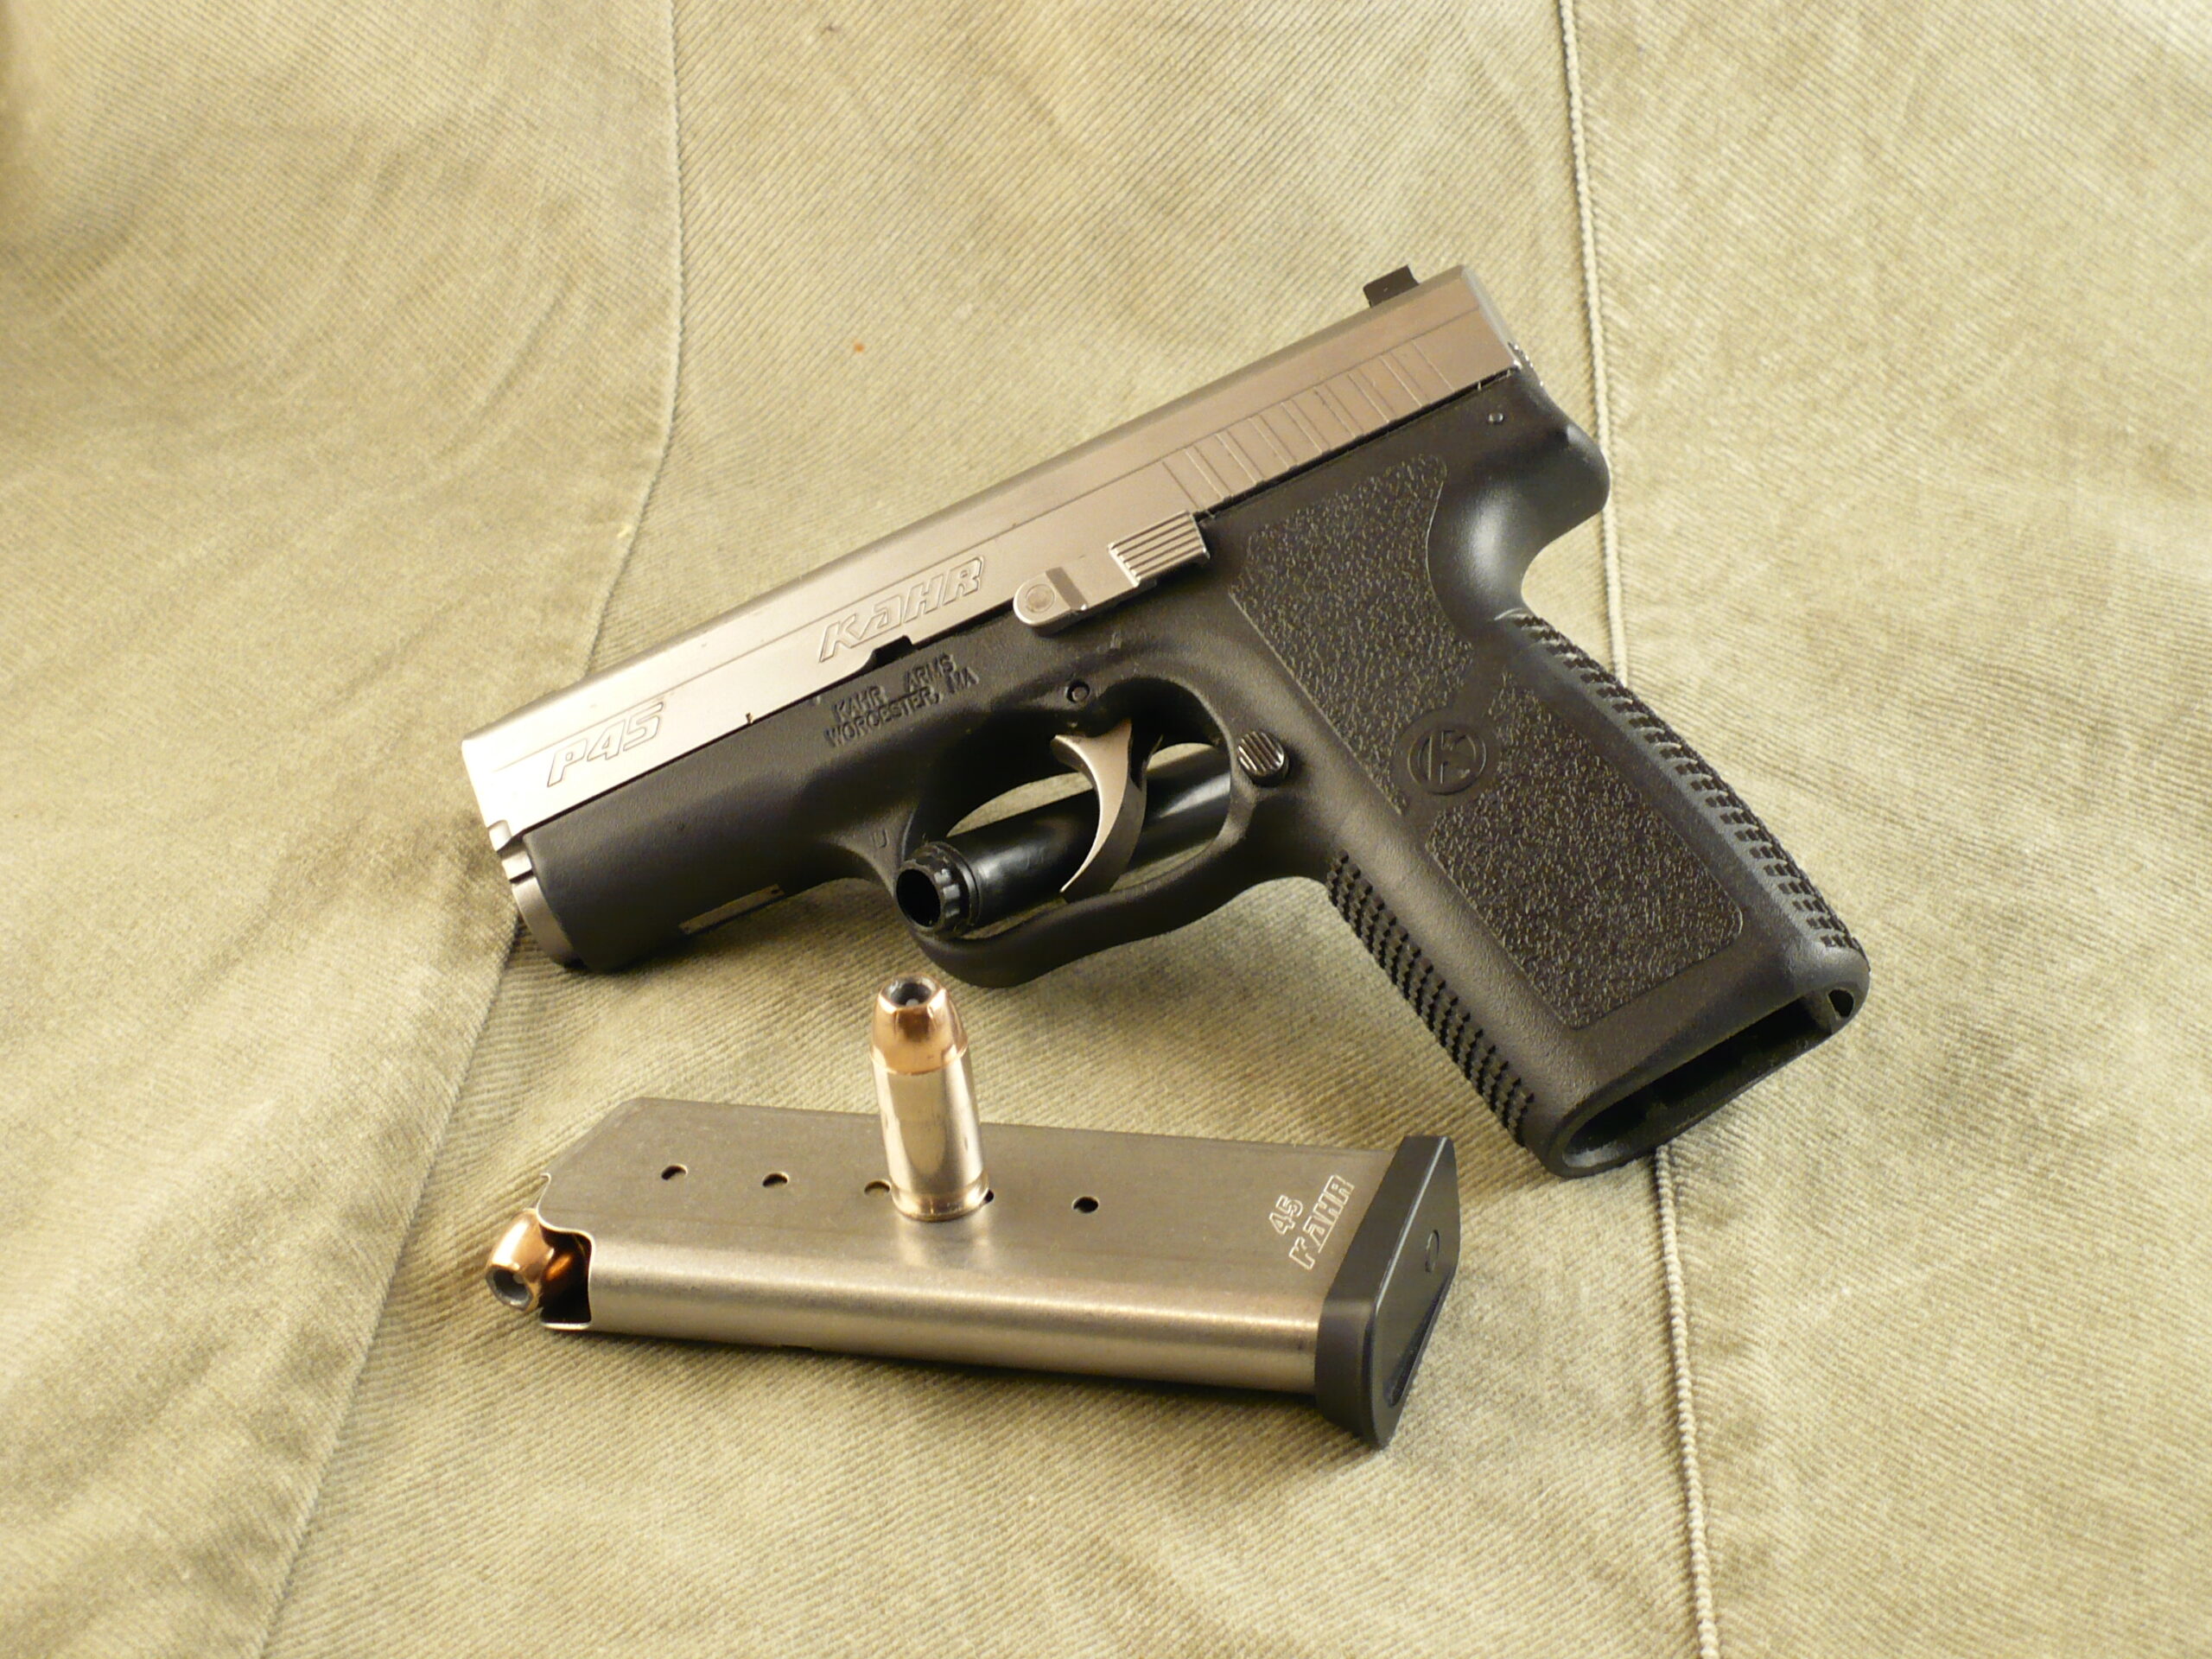 9mm pistols with easy maintenance